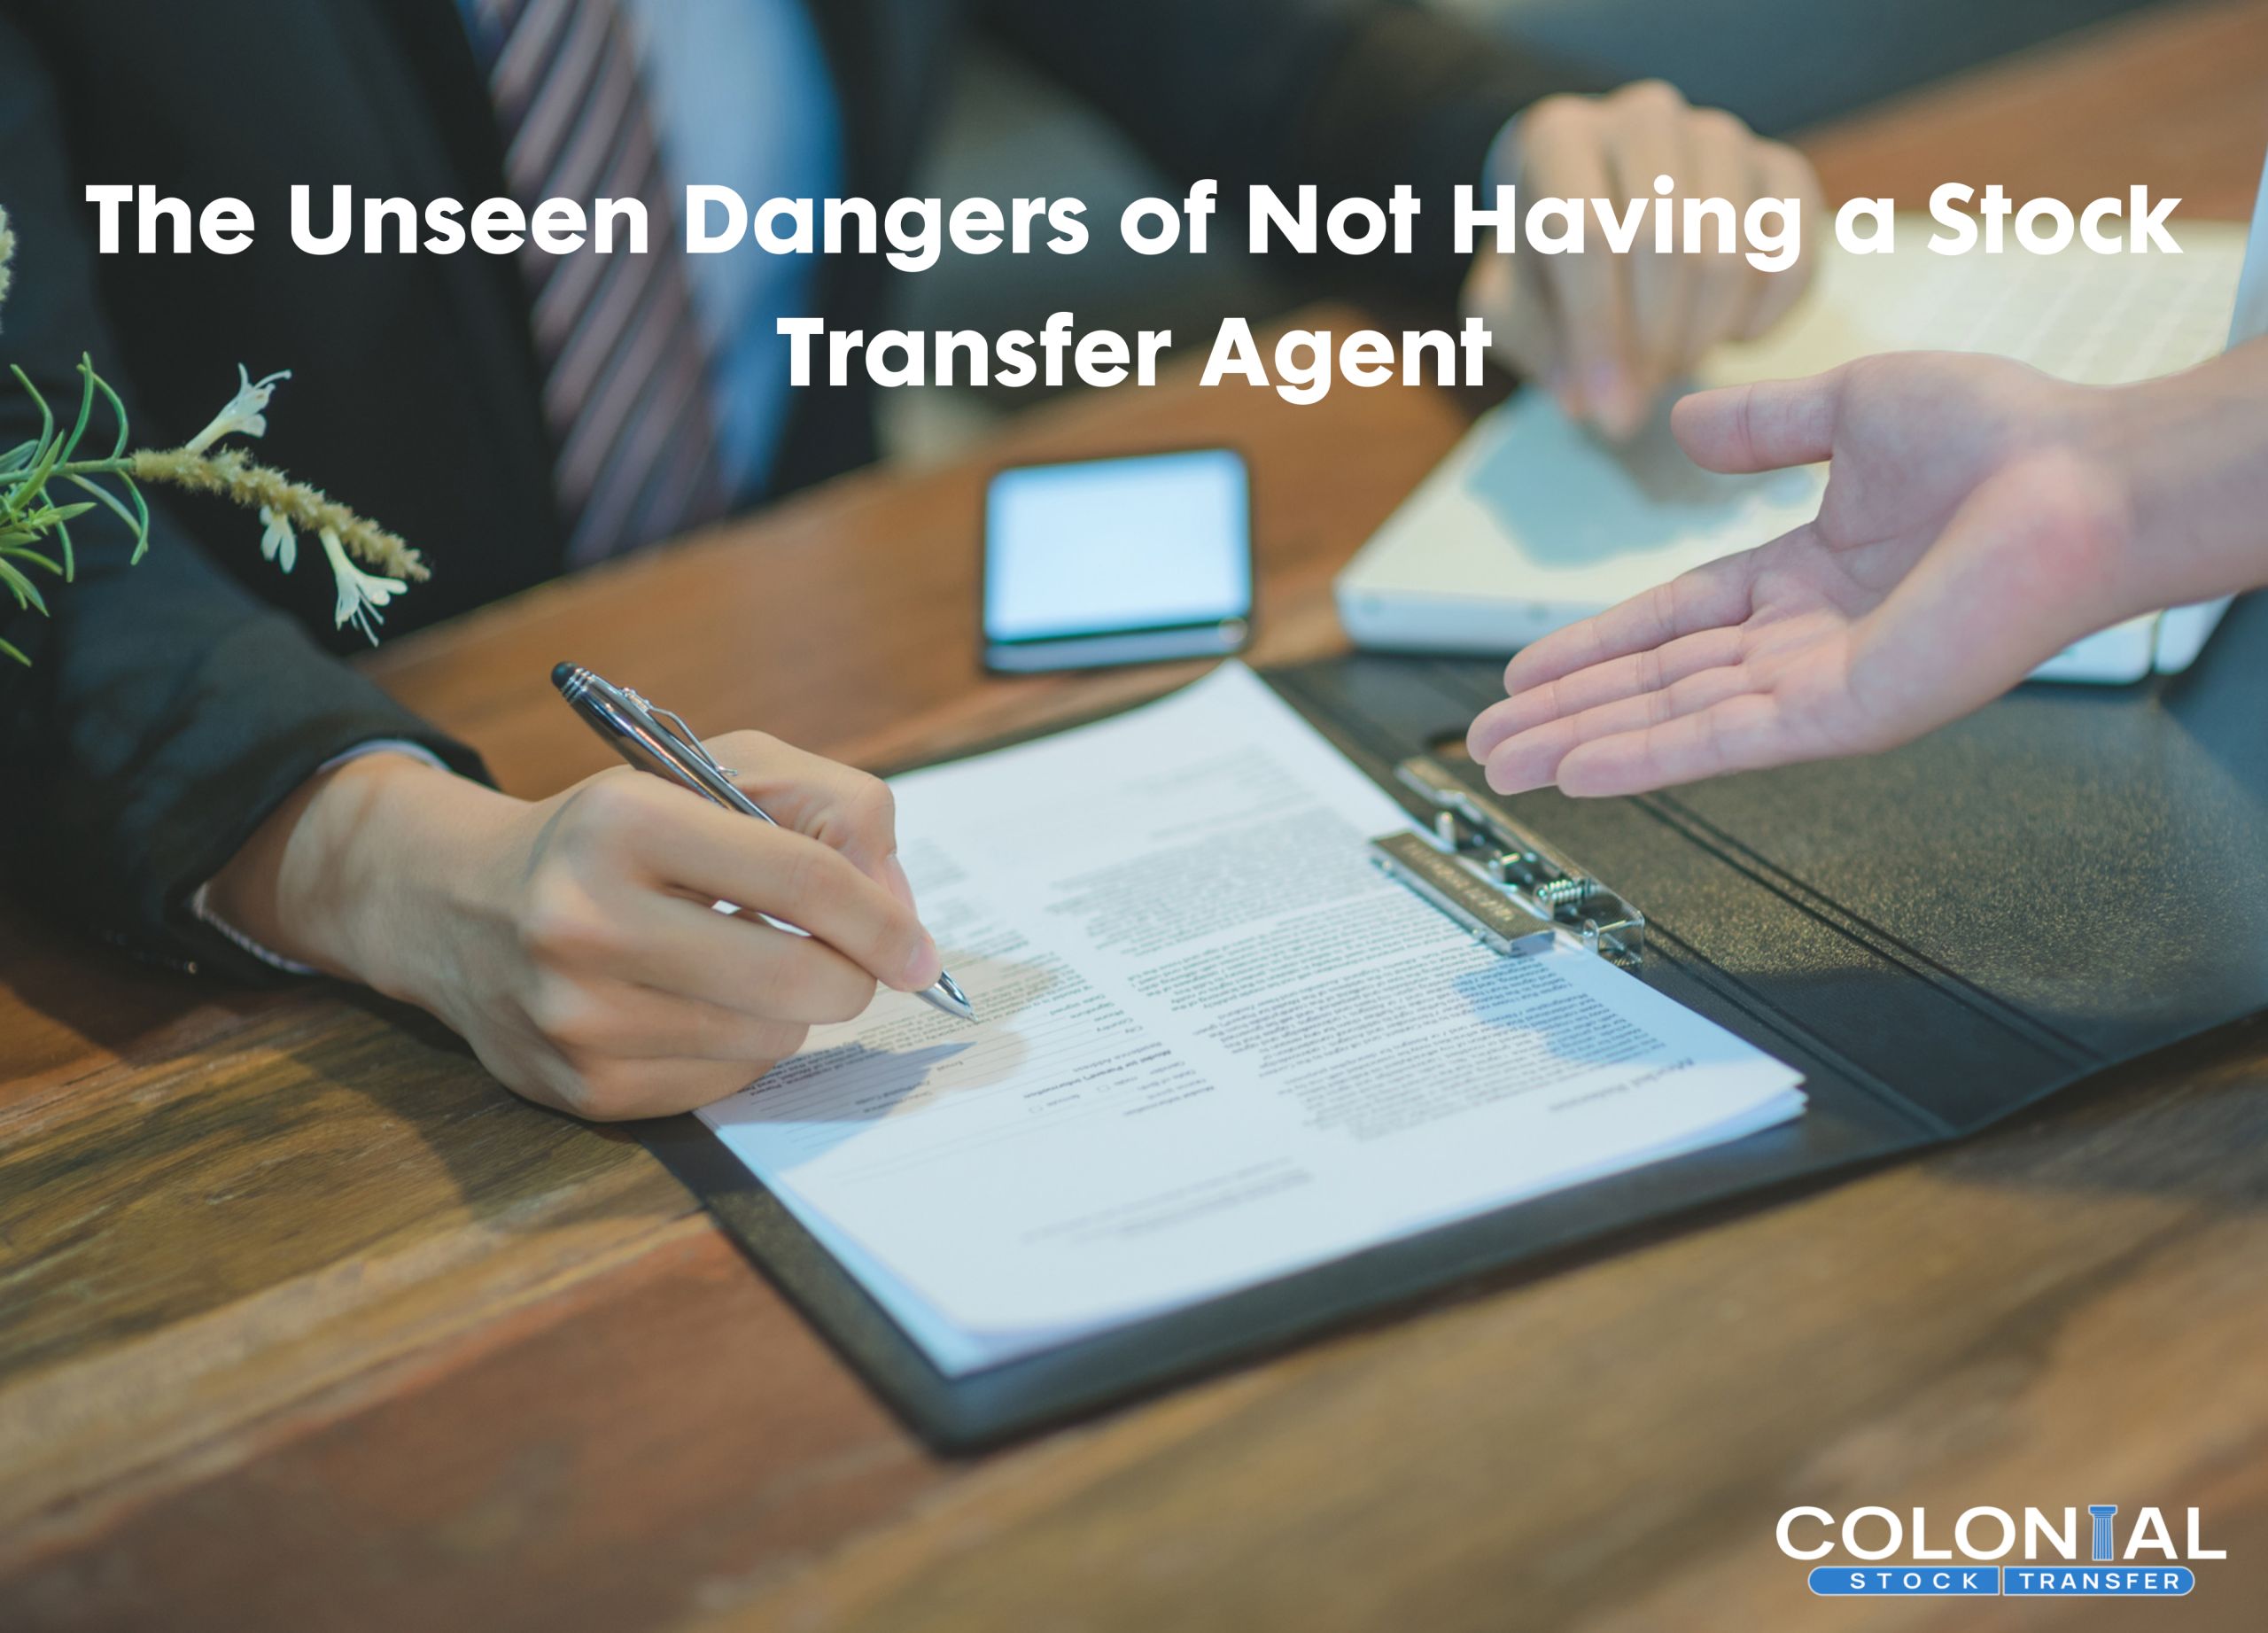 The Unseen Dangers of Not Having a Stock Transfer Agent